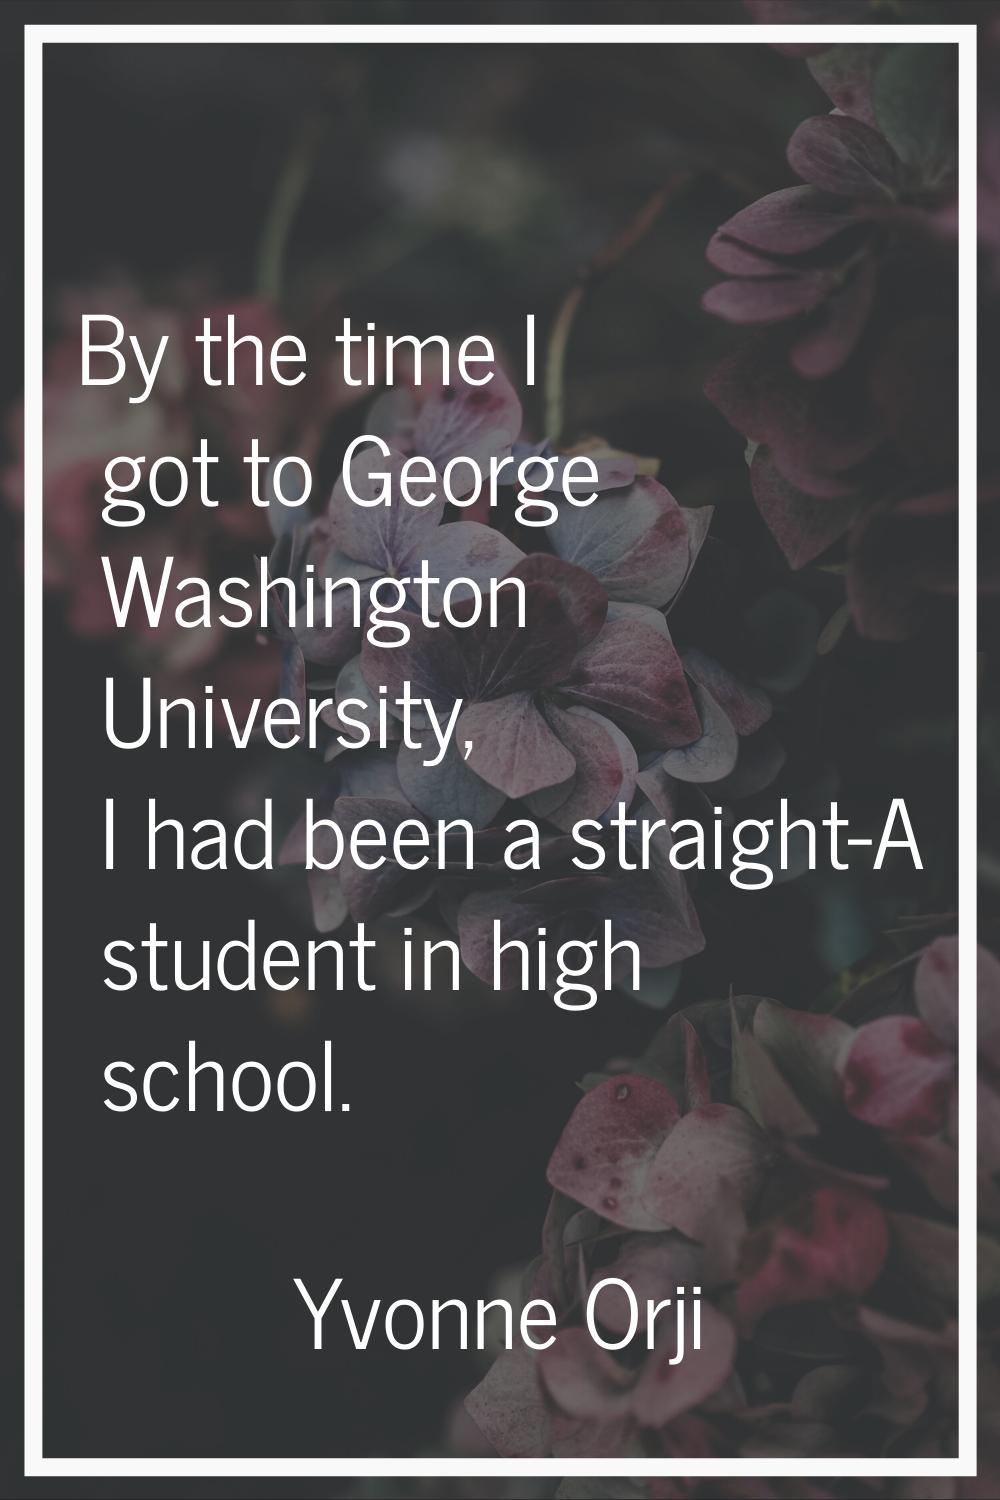 By the time I got to George Washington University, I had been a straight-A student in high school.